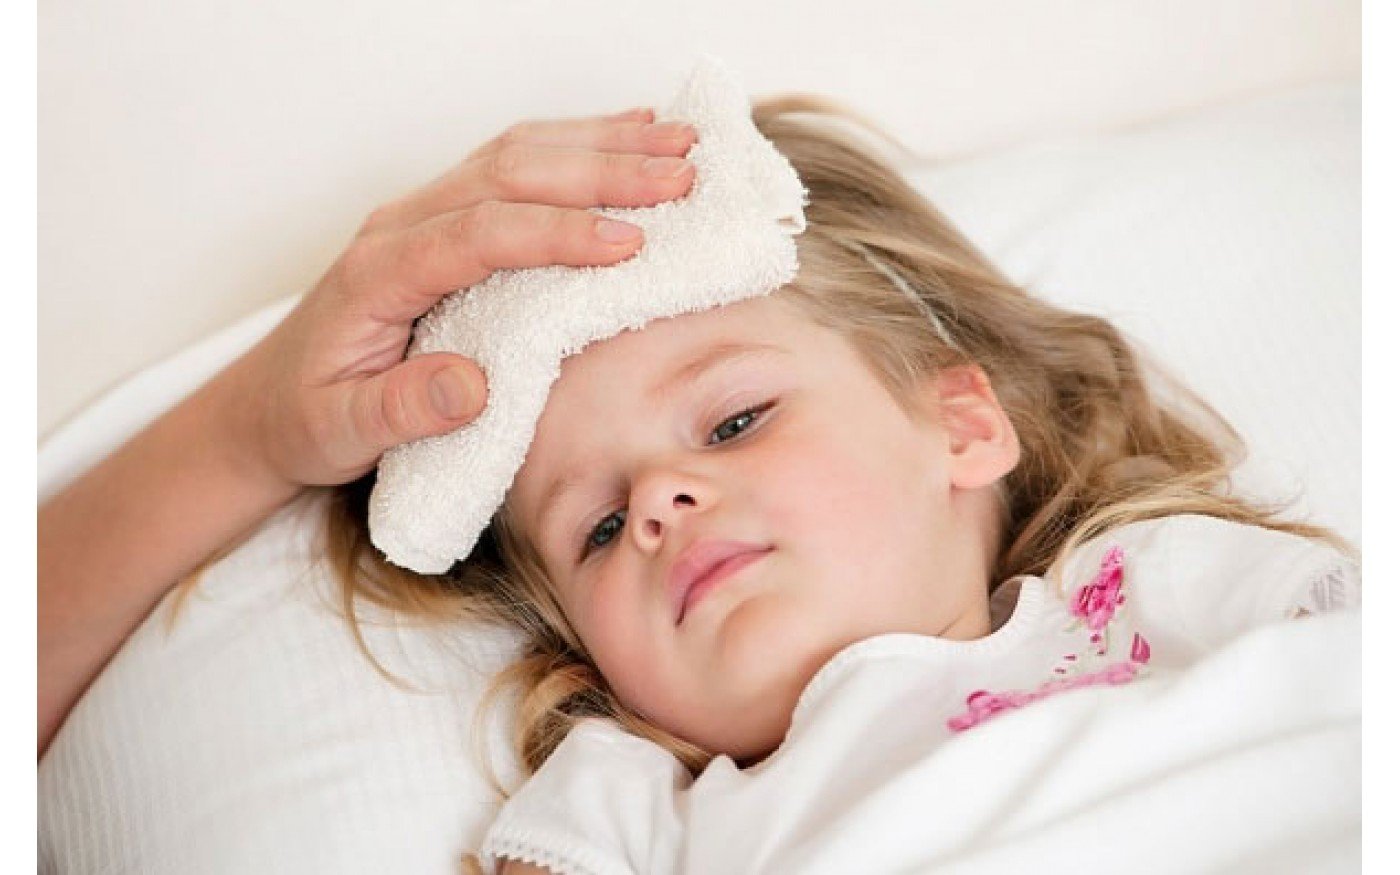 What to do when your baby has a fever?